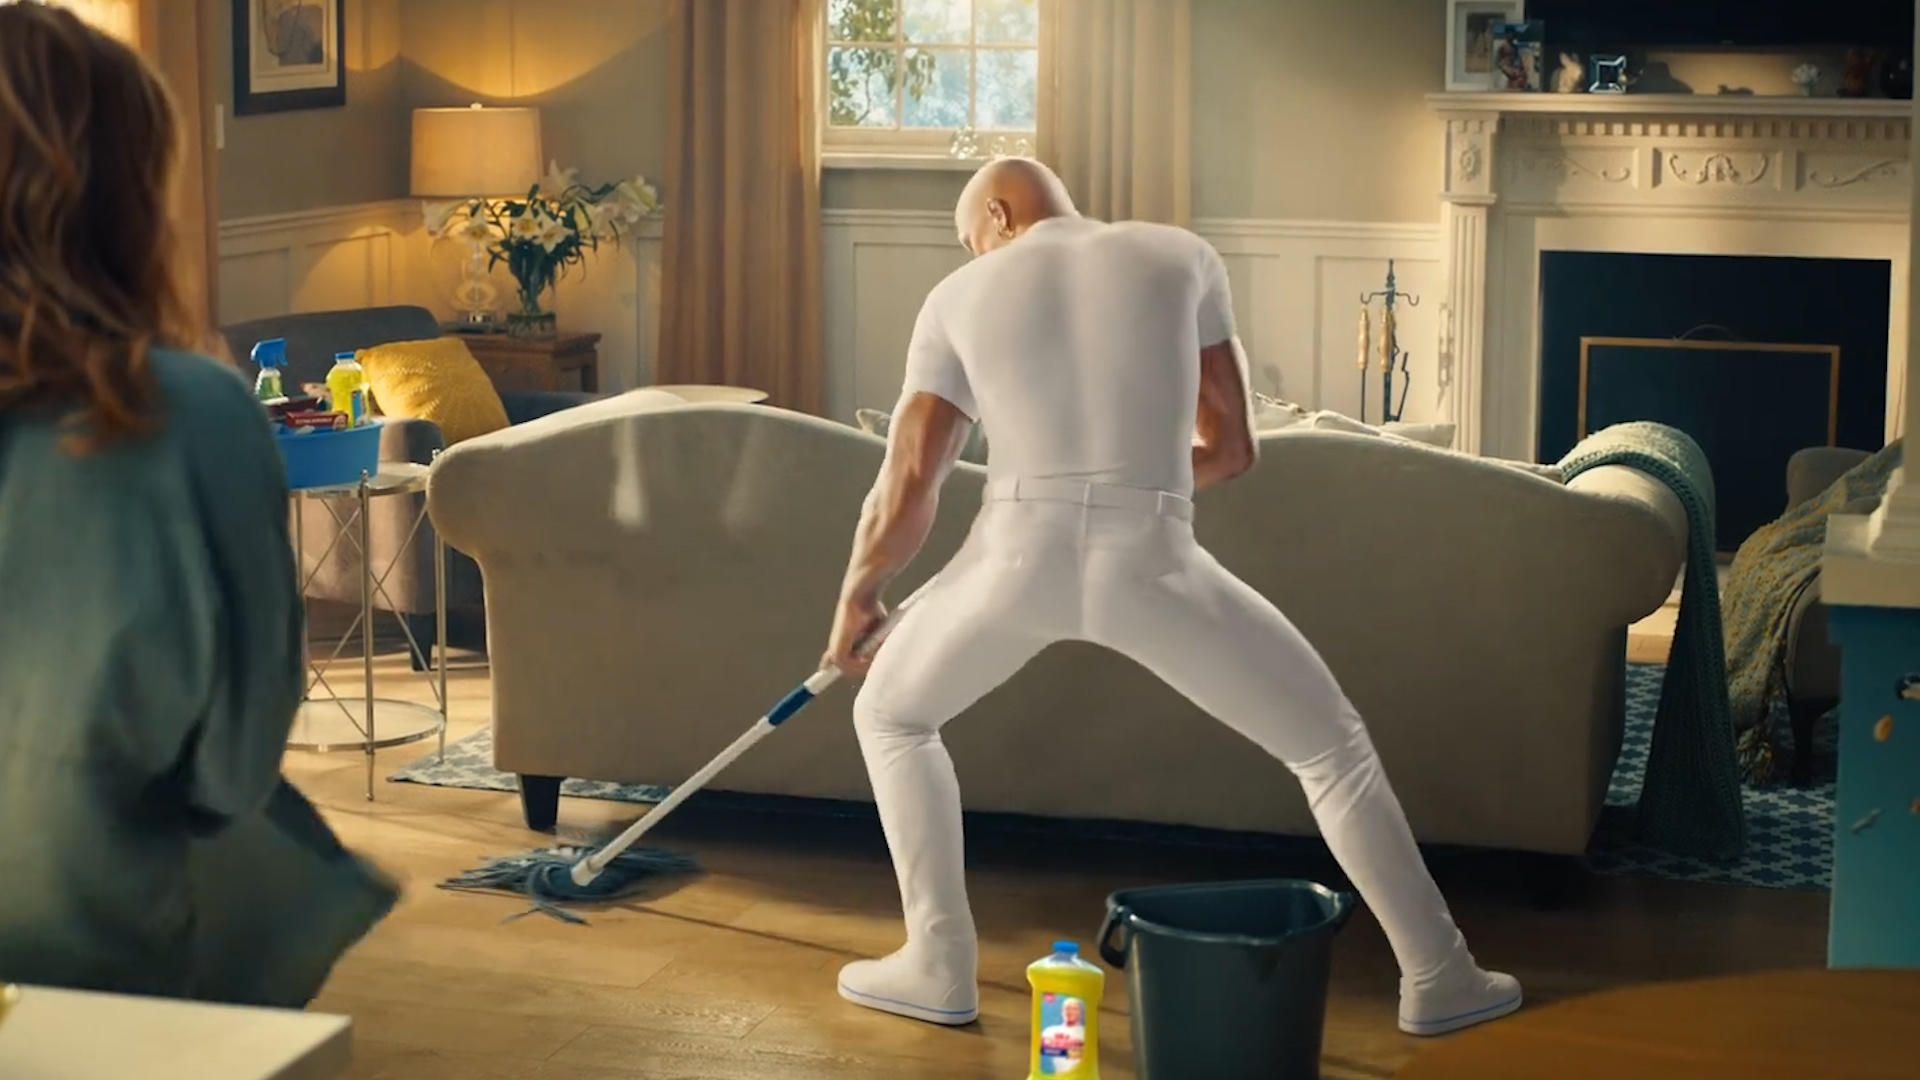 Mr. Clean: Cleaner of Your Dreams.